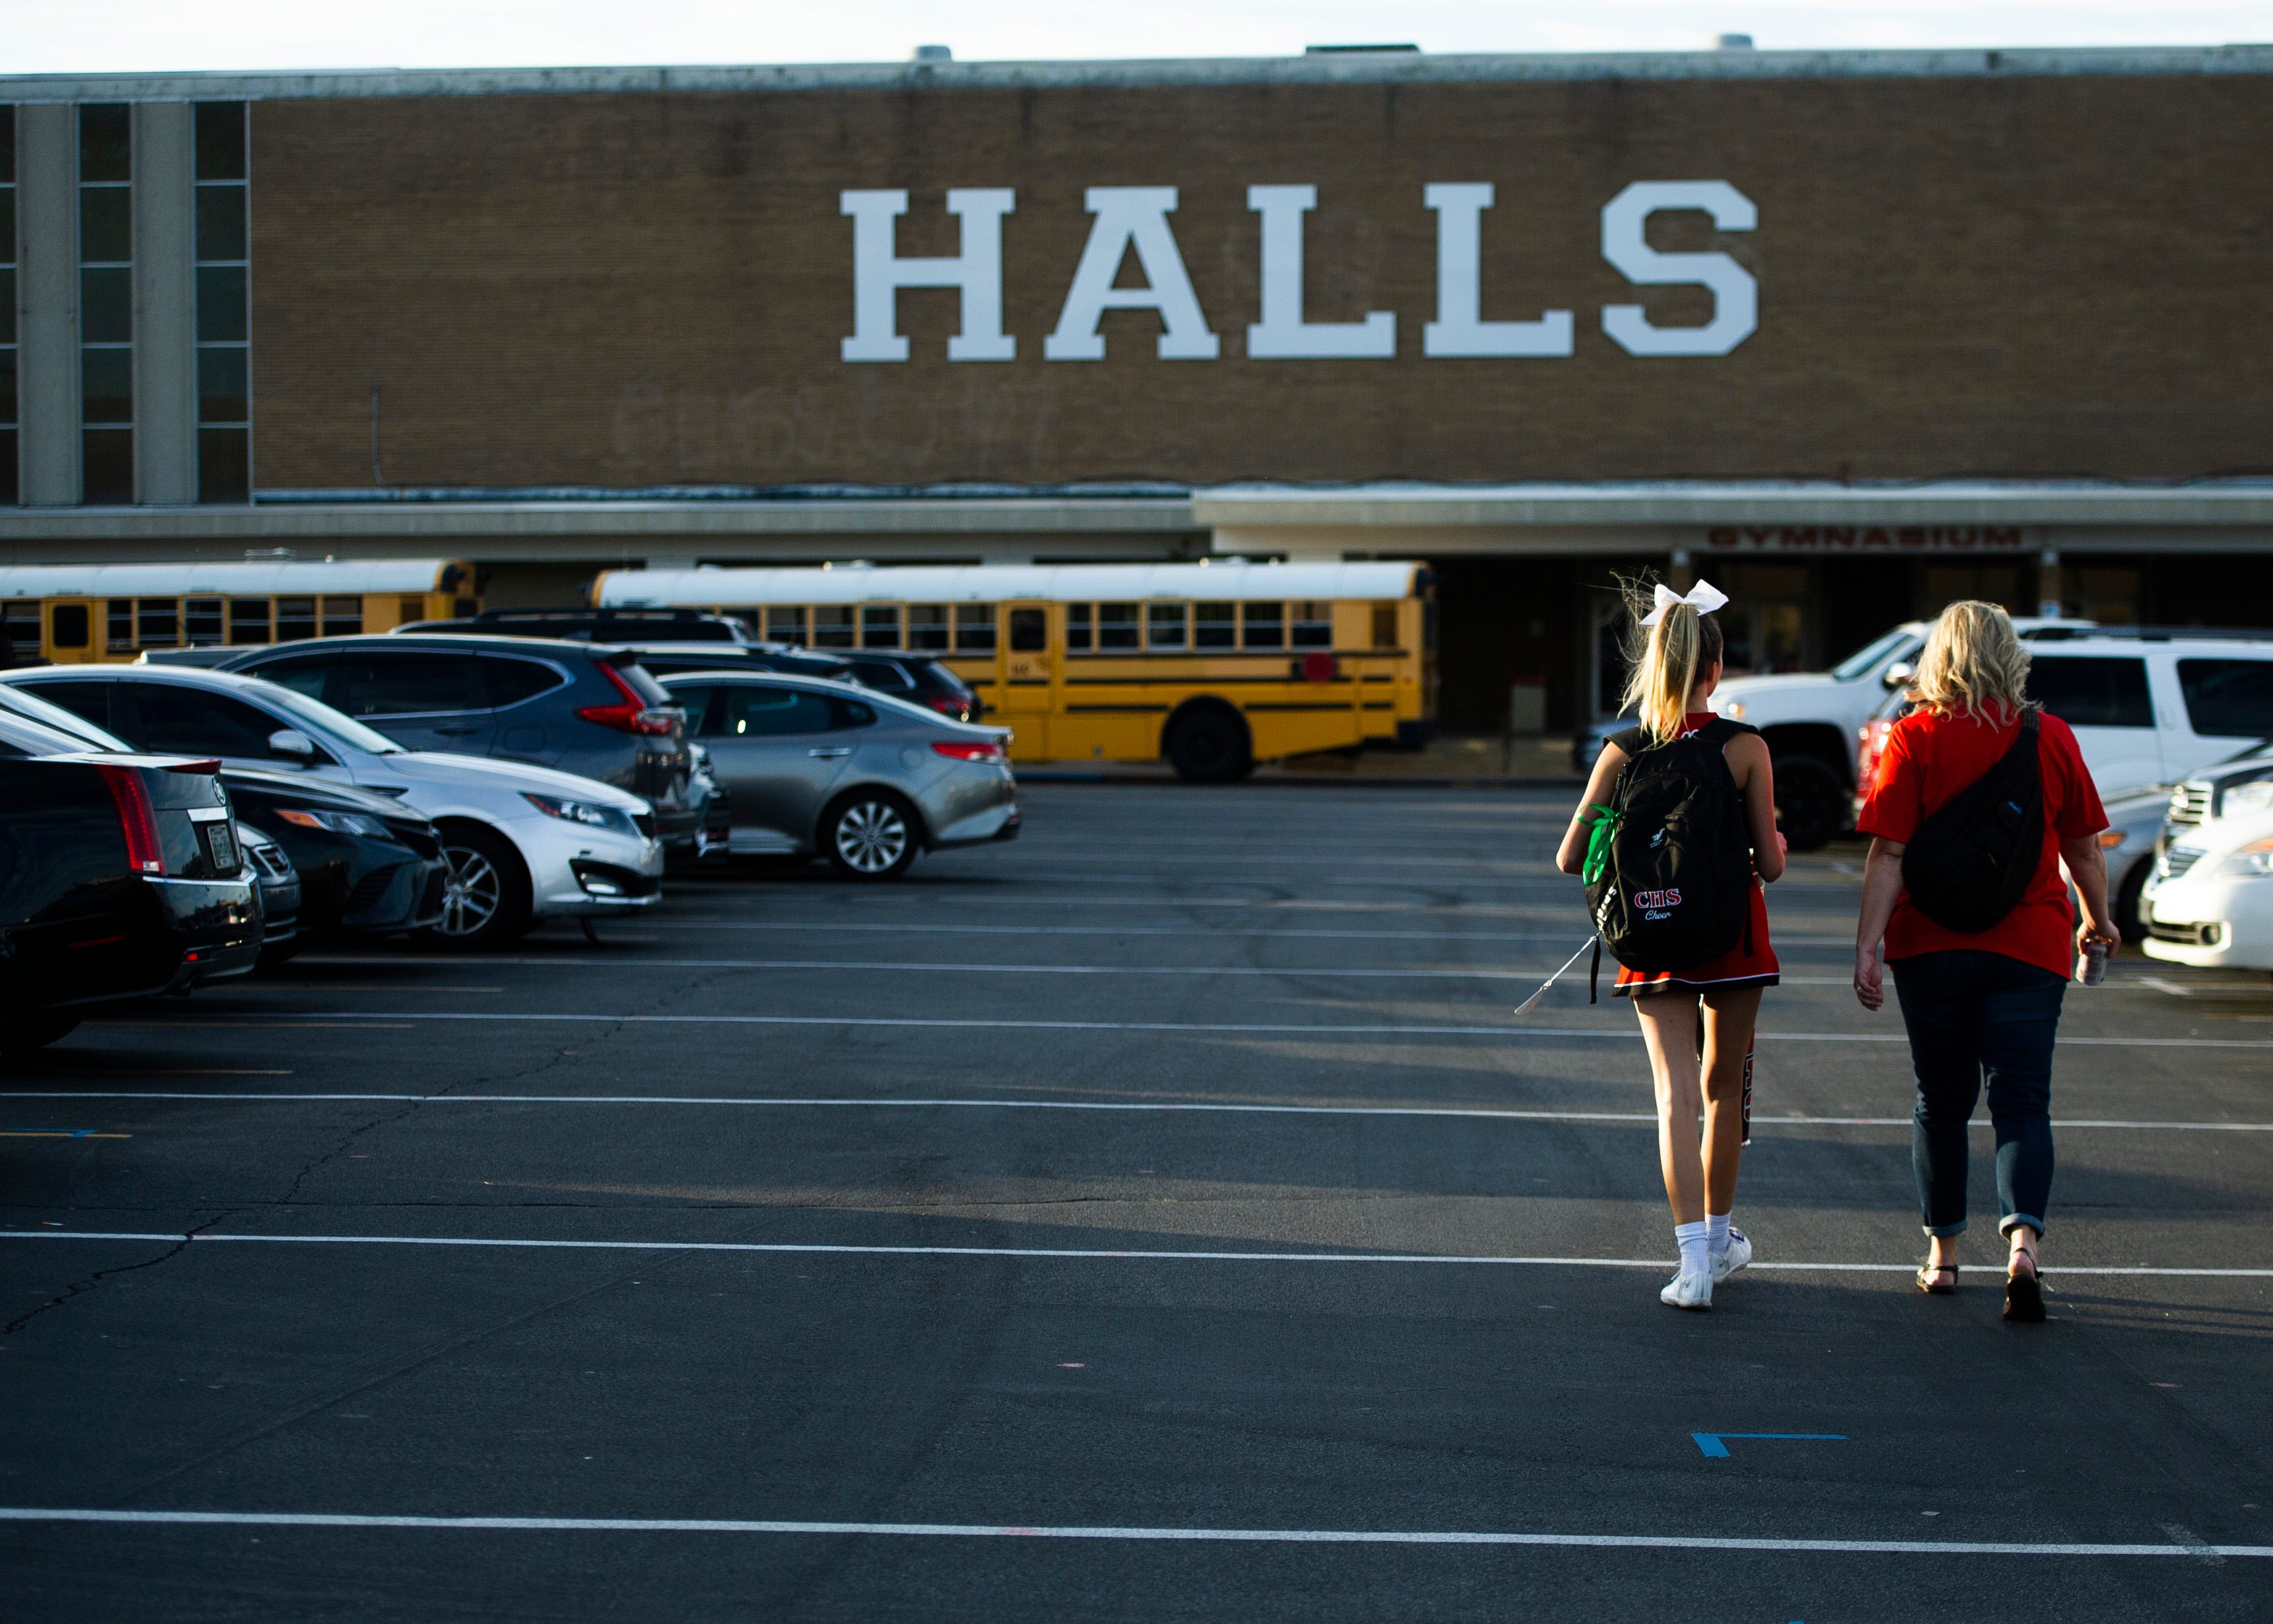 A Central cheerleader walks to the stadium before the Halls and Central high school football game on Friday, October 4, 2019 at Halls High School.